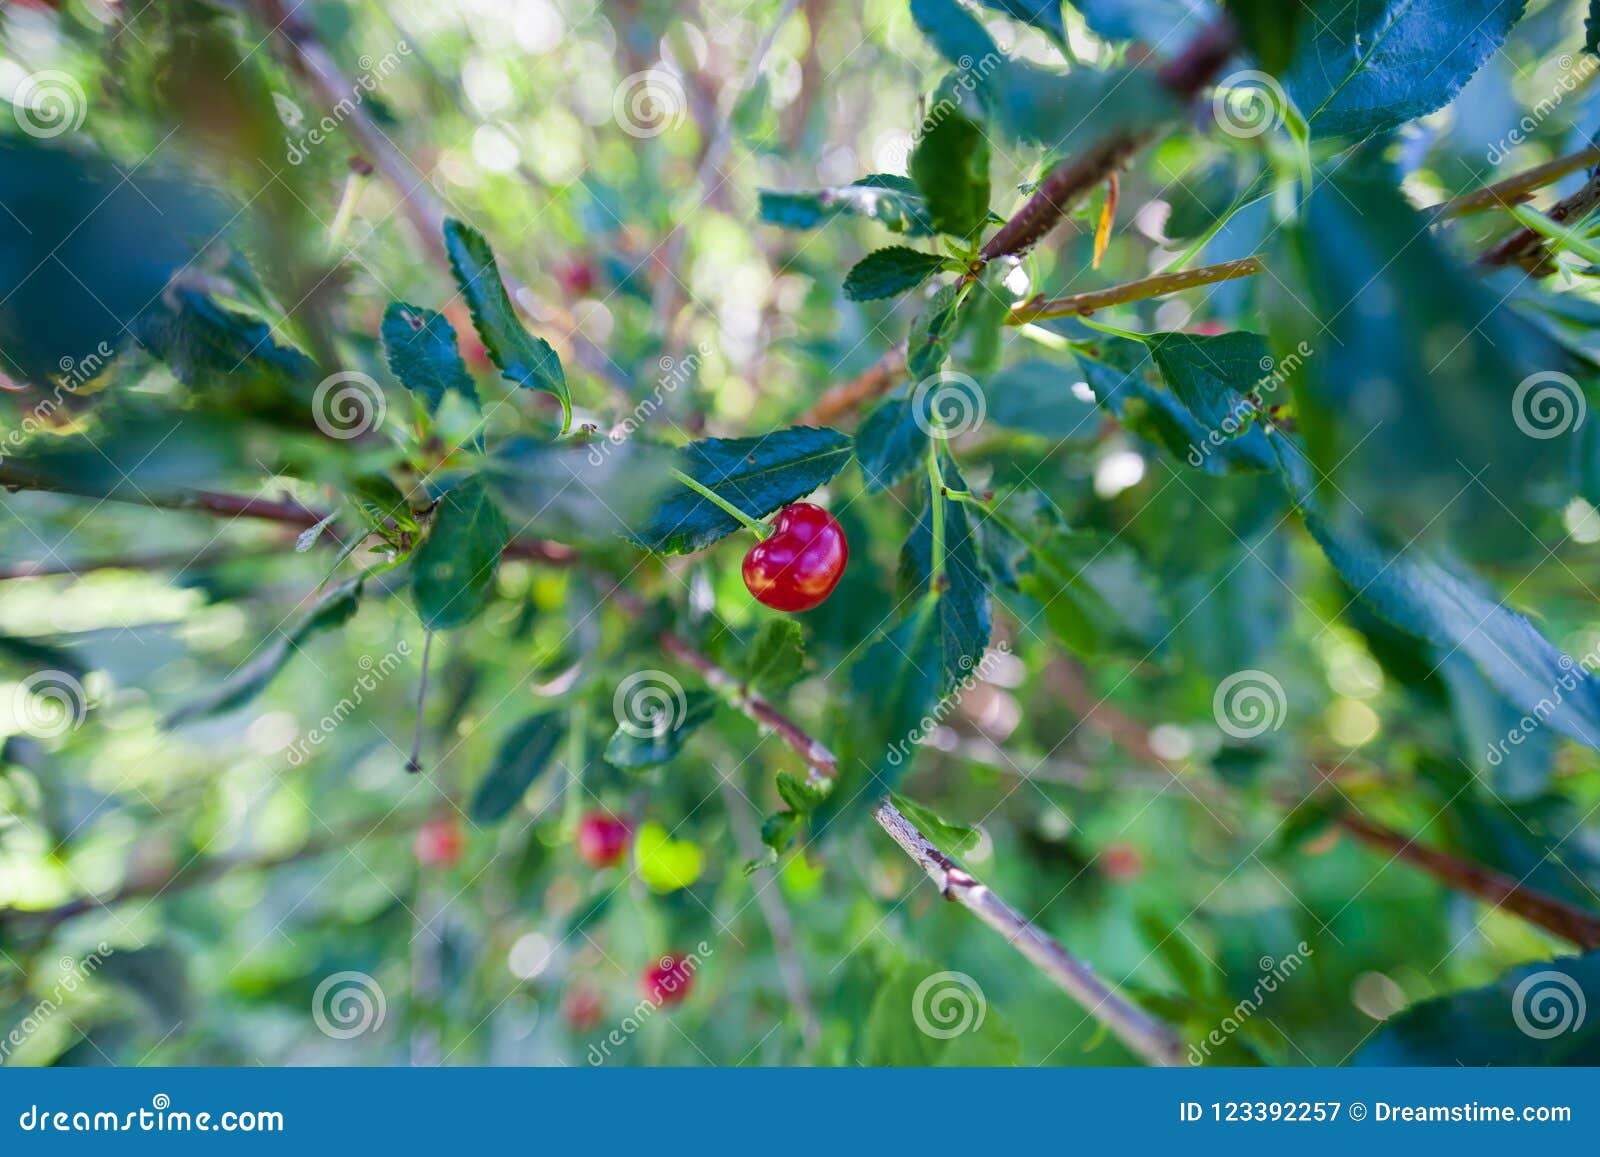 cherry berry on a branch